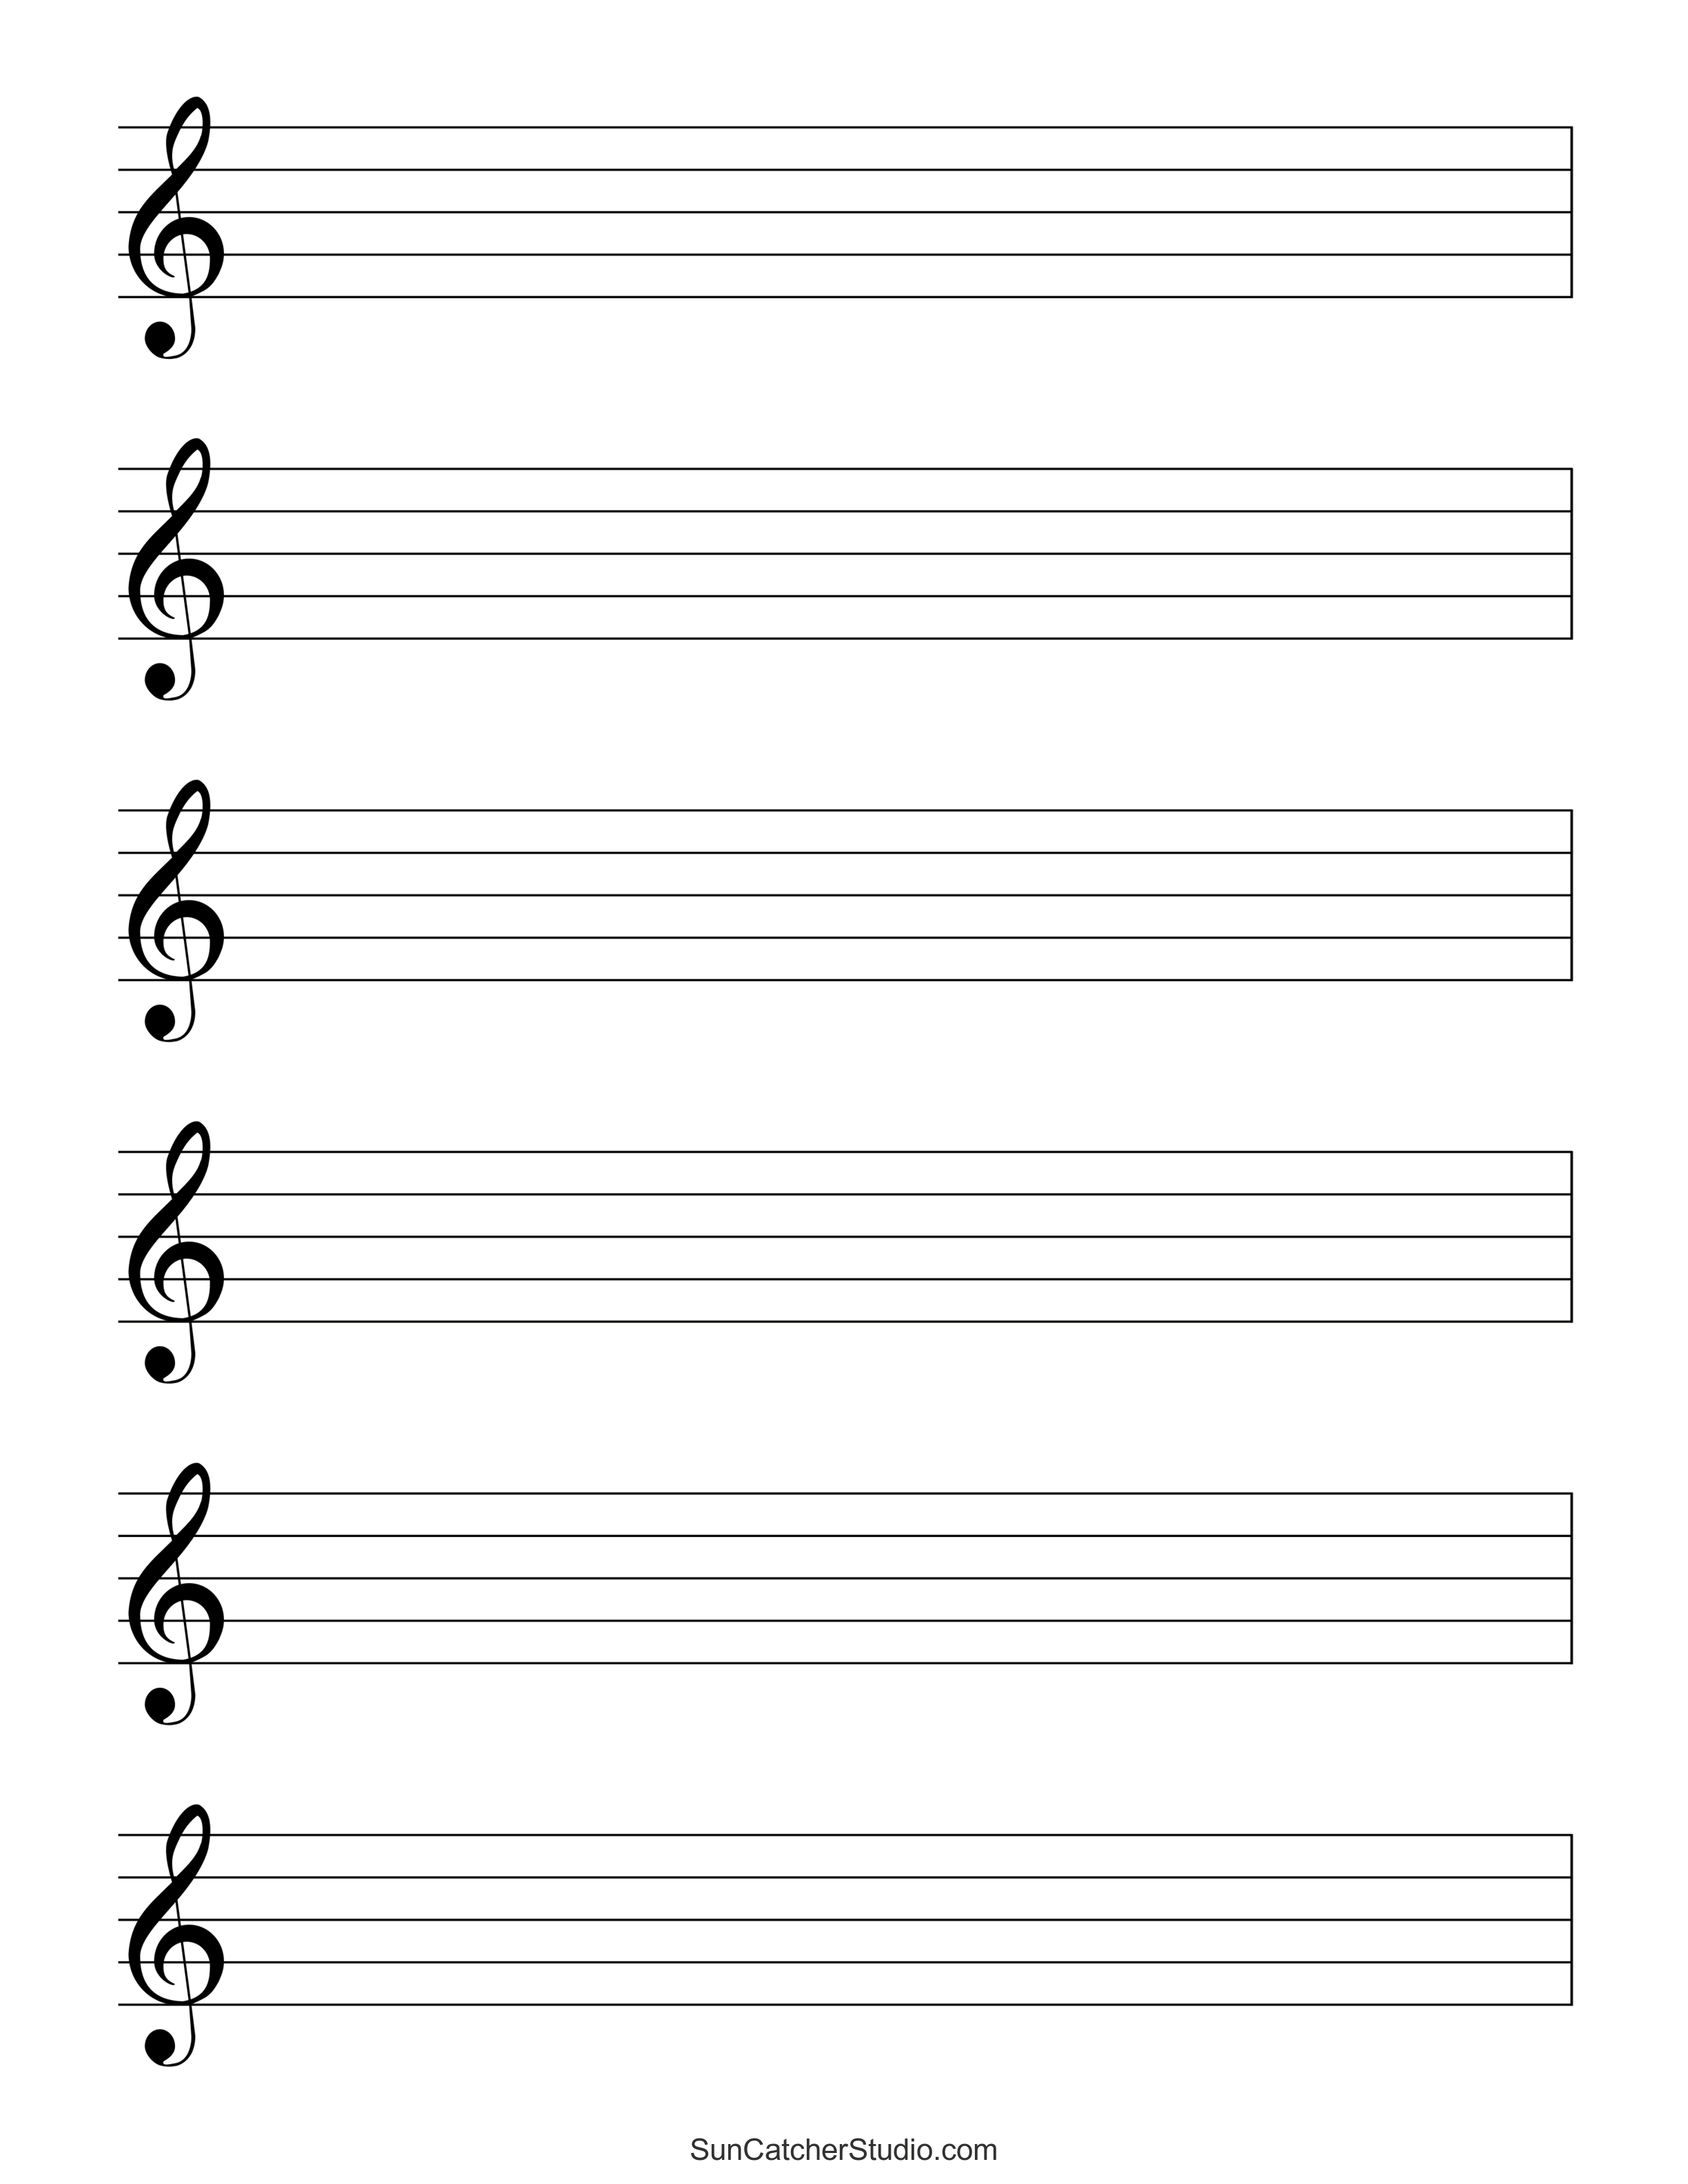 Blank Sheet Music Free Printable Staff Paper DIY Projects Patterns Monograms Designs 